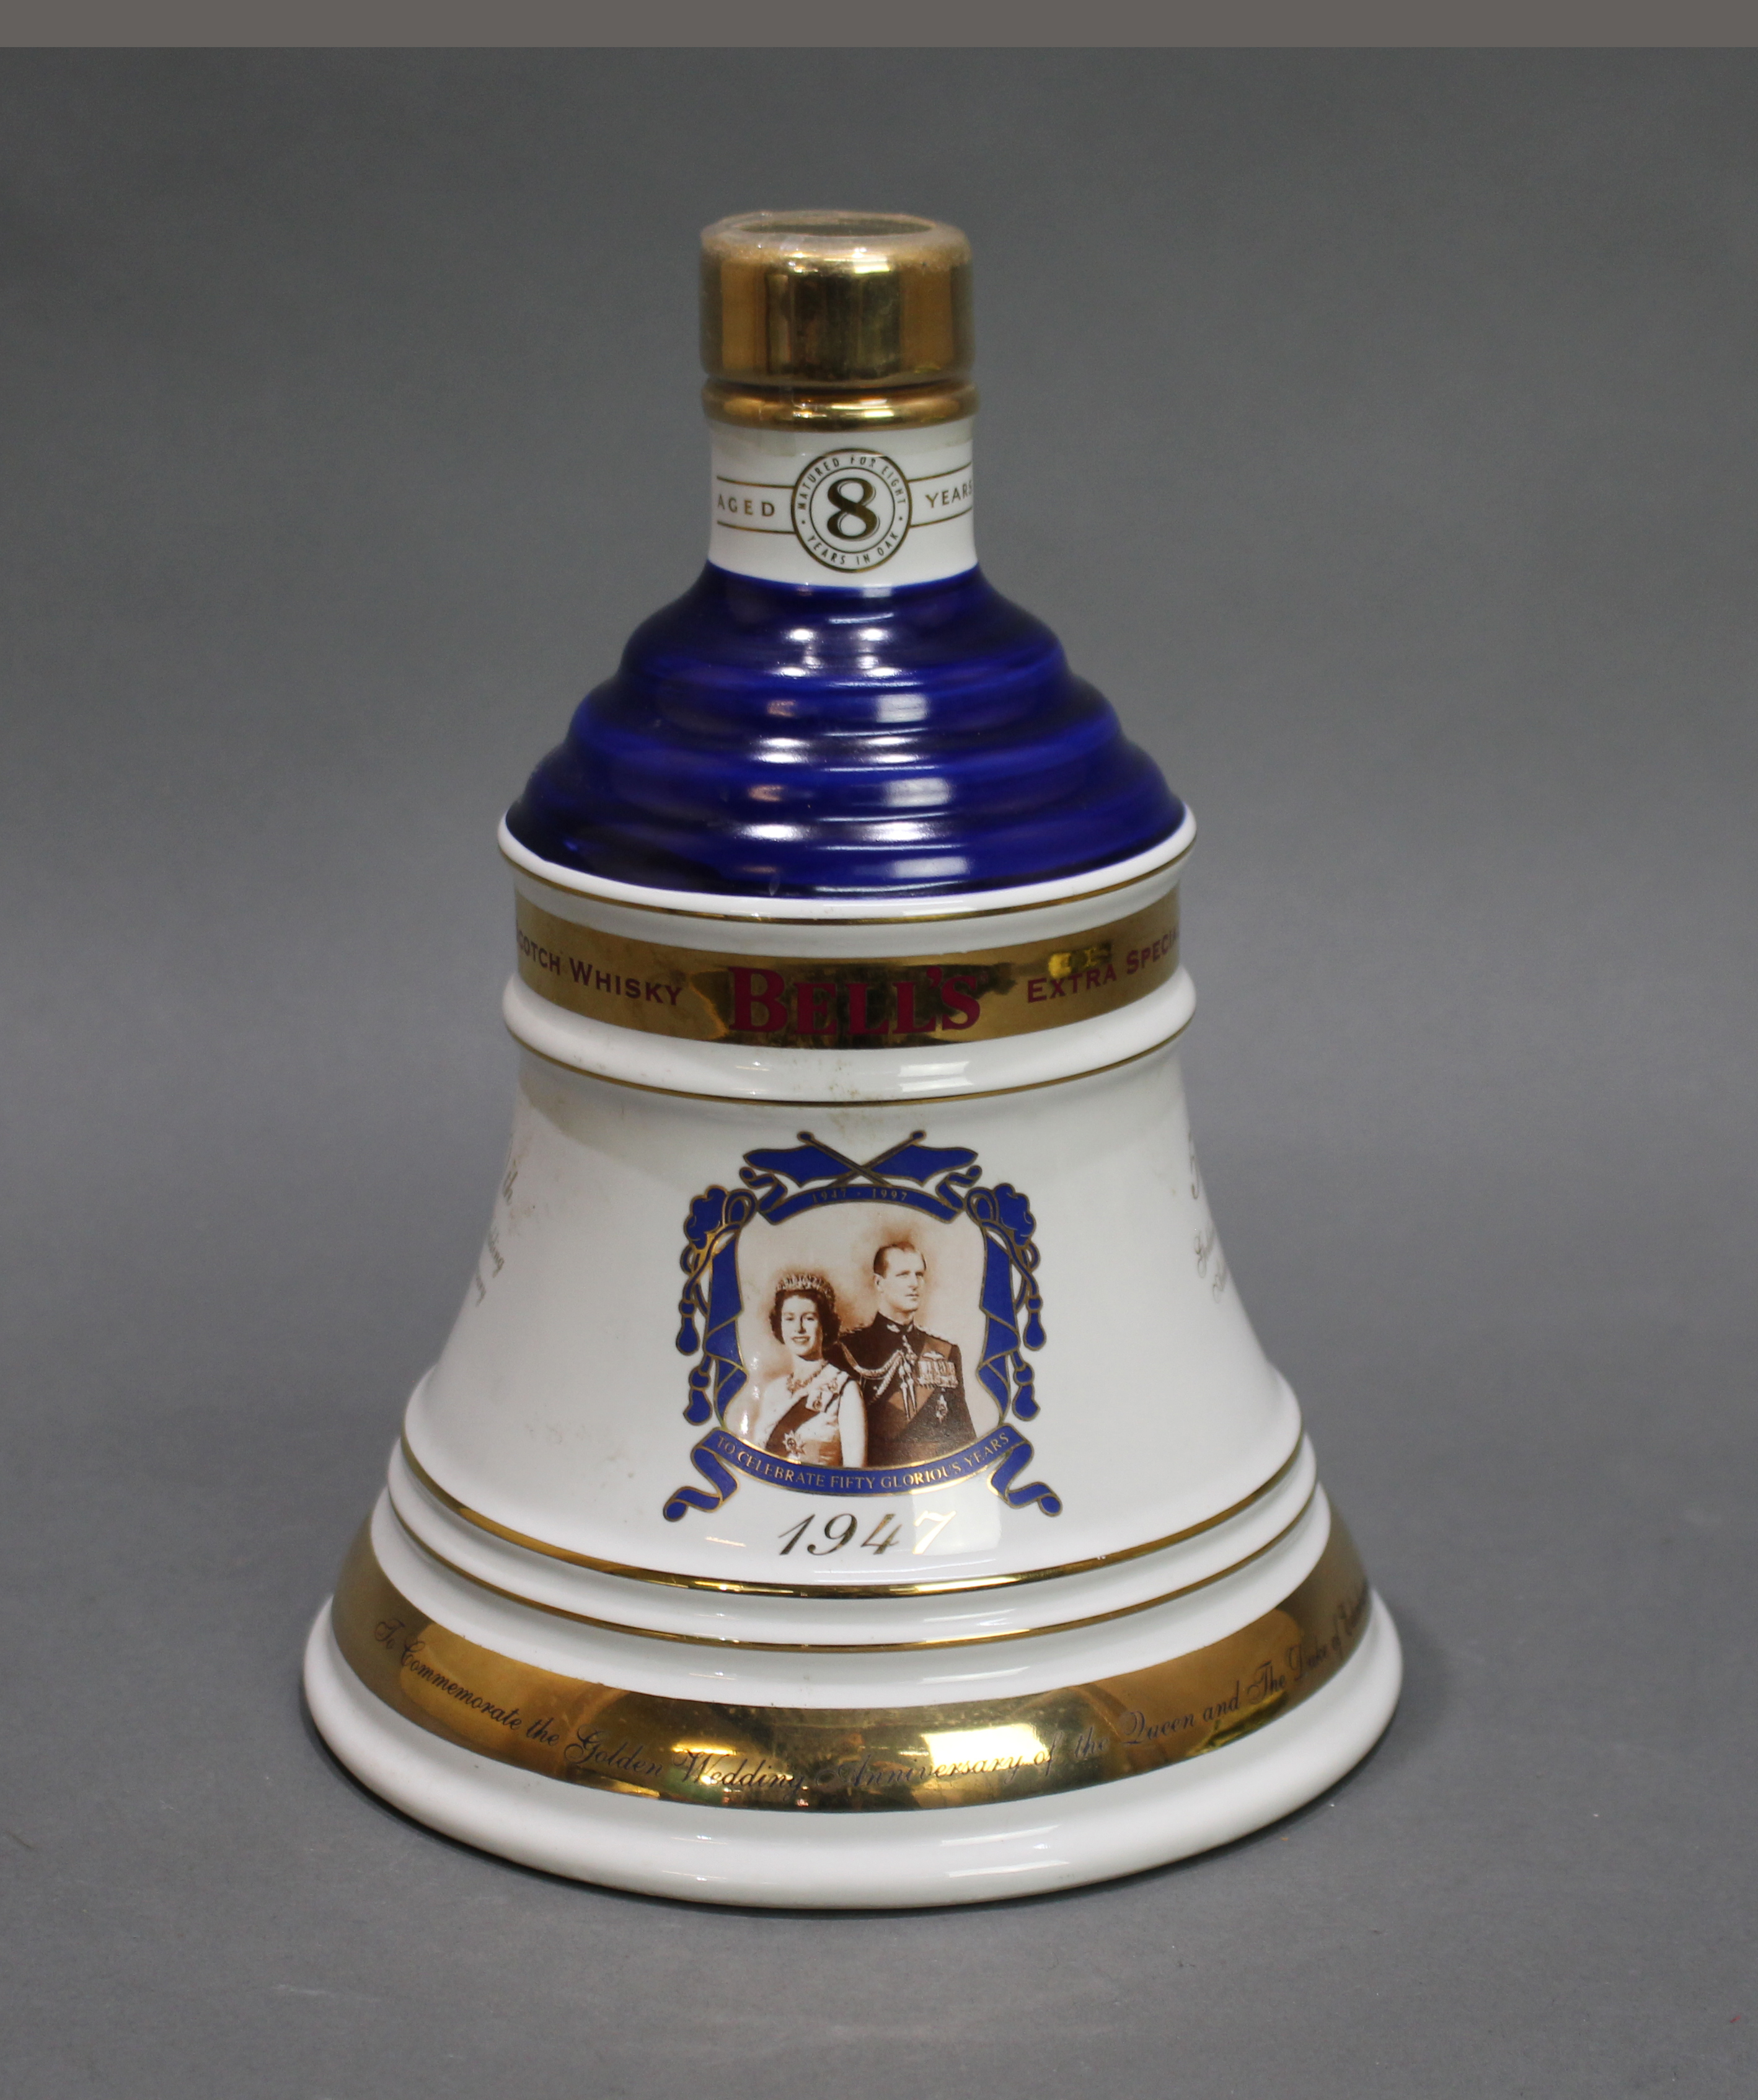 Bell's Old Scotch Whisky Commemorative 1997 Royal - Image 2 of 4